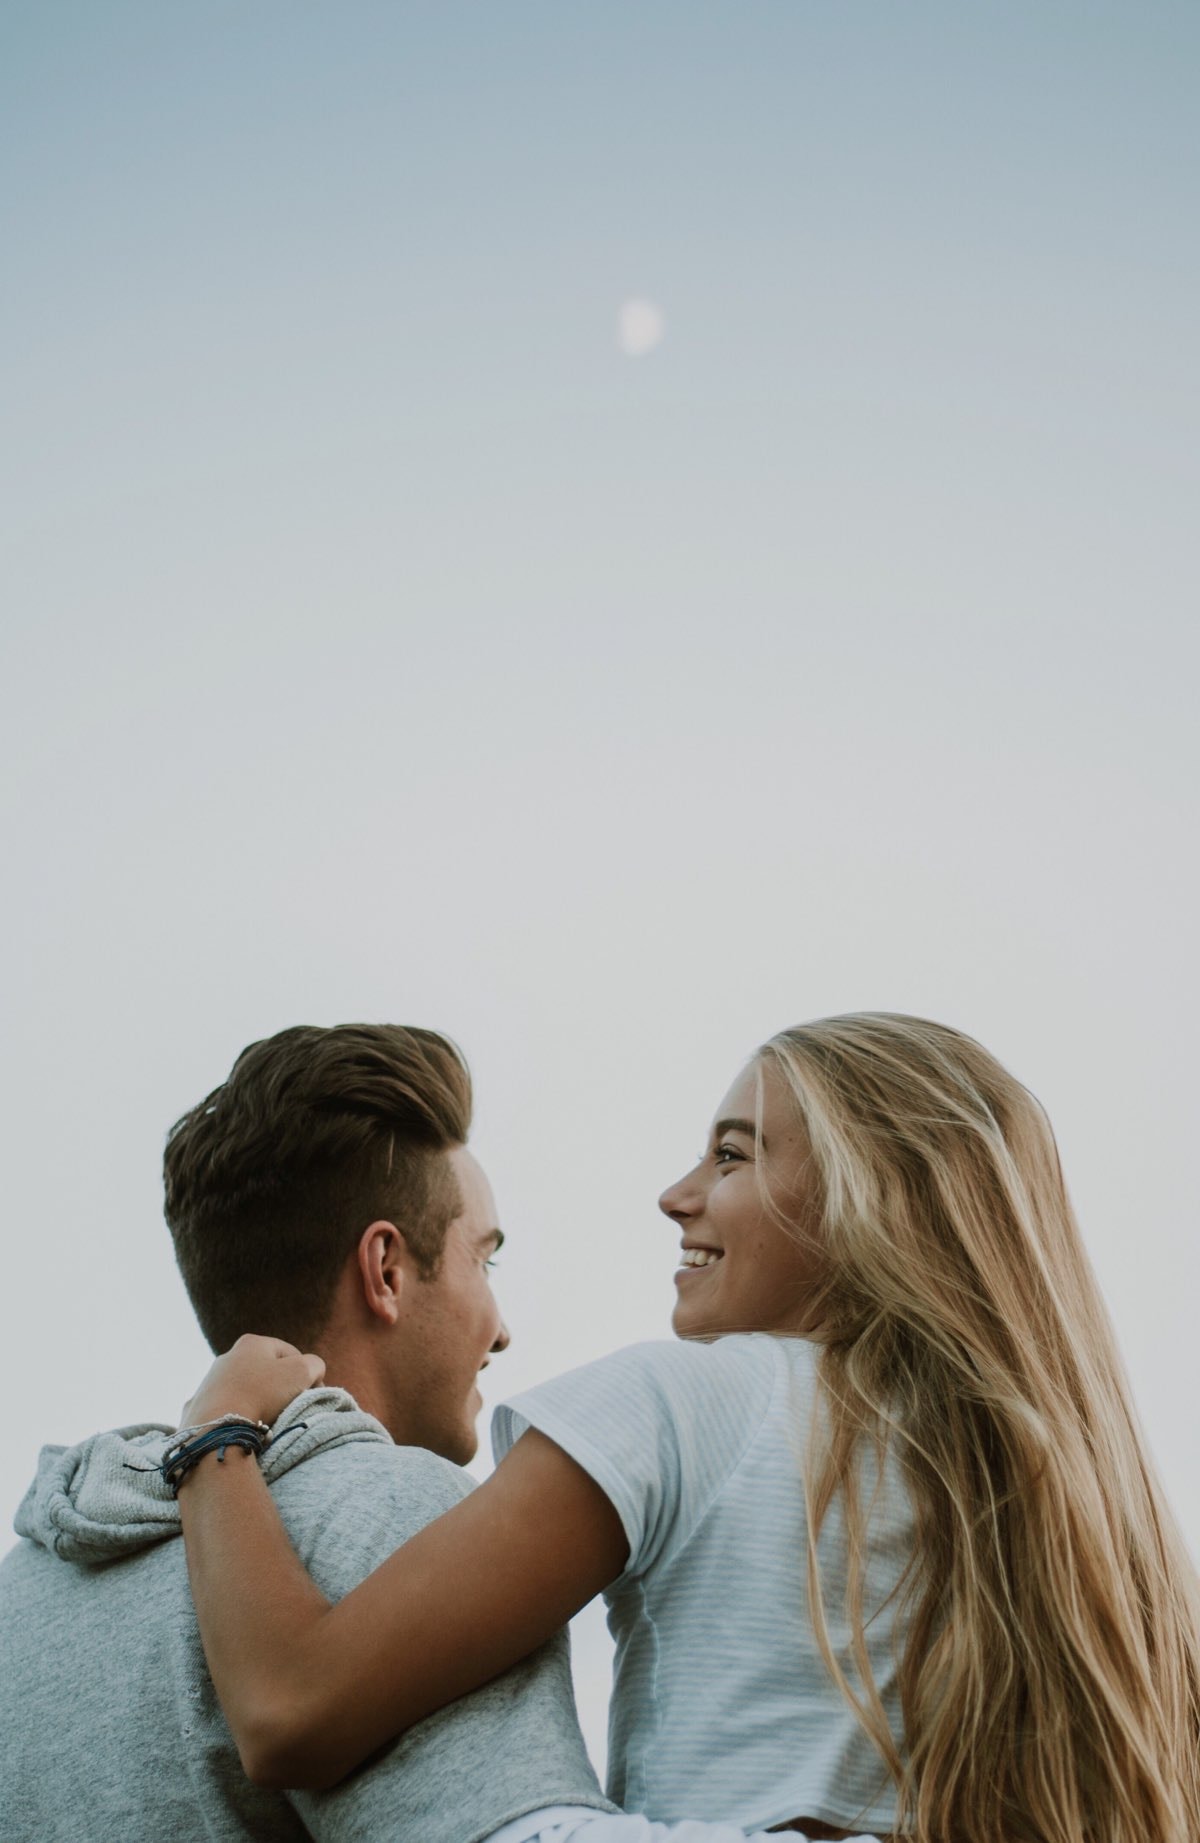 Asking questions, talking, and listening to each other is the best way to keep the connection alive in your relationship. Here are 125 romantic questions for couples to get to know and connect with your spouse.